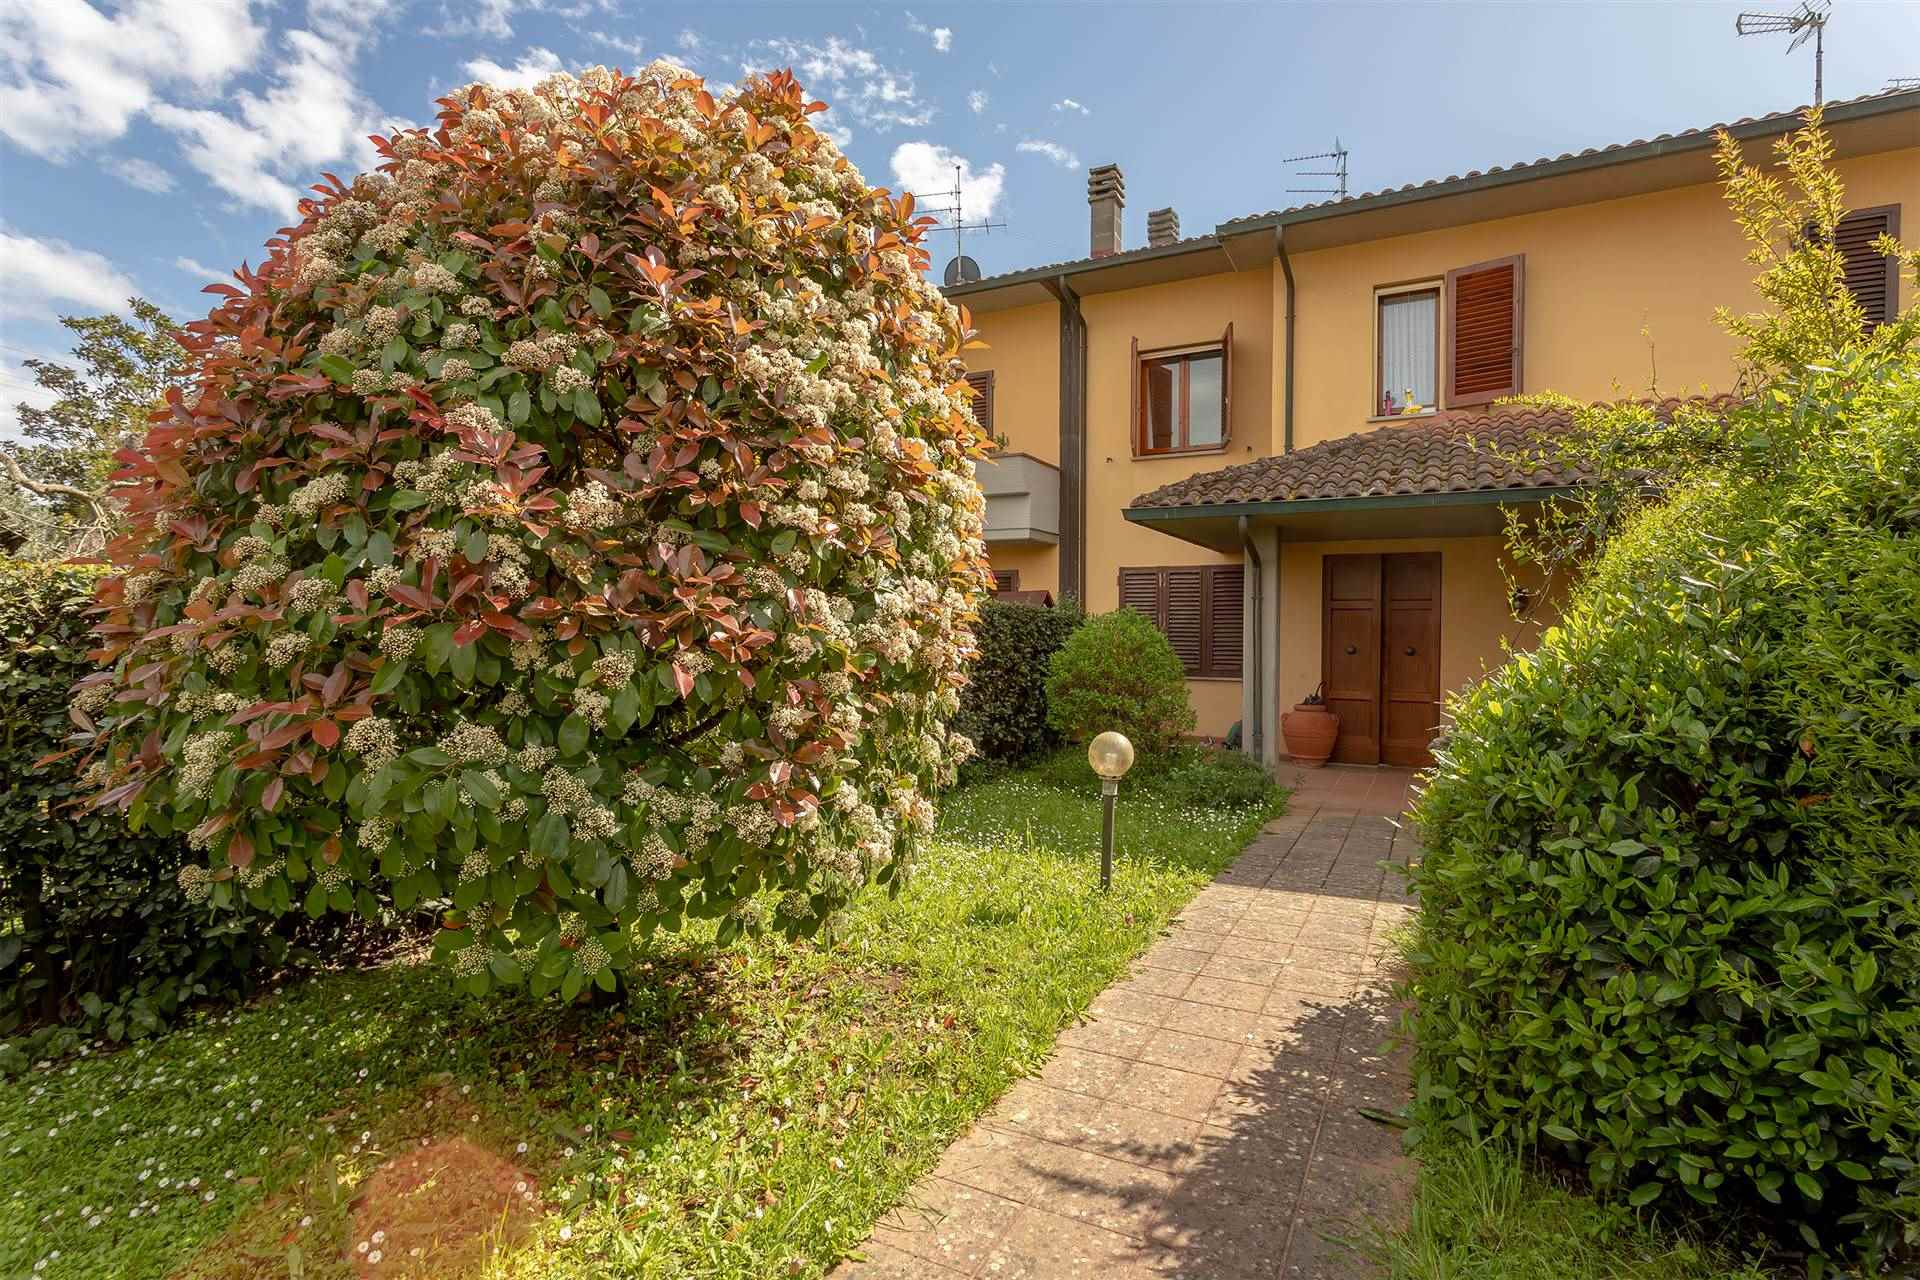 COMEANA, CARMIGNANO, Terraced house for sale of 164 Sq. mt., Excellent Condition, Heating Individual heating system, Energetic class: G, placed at 